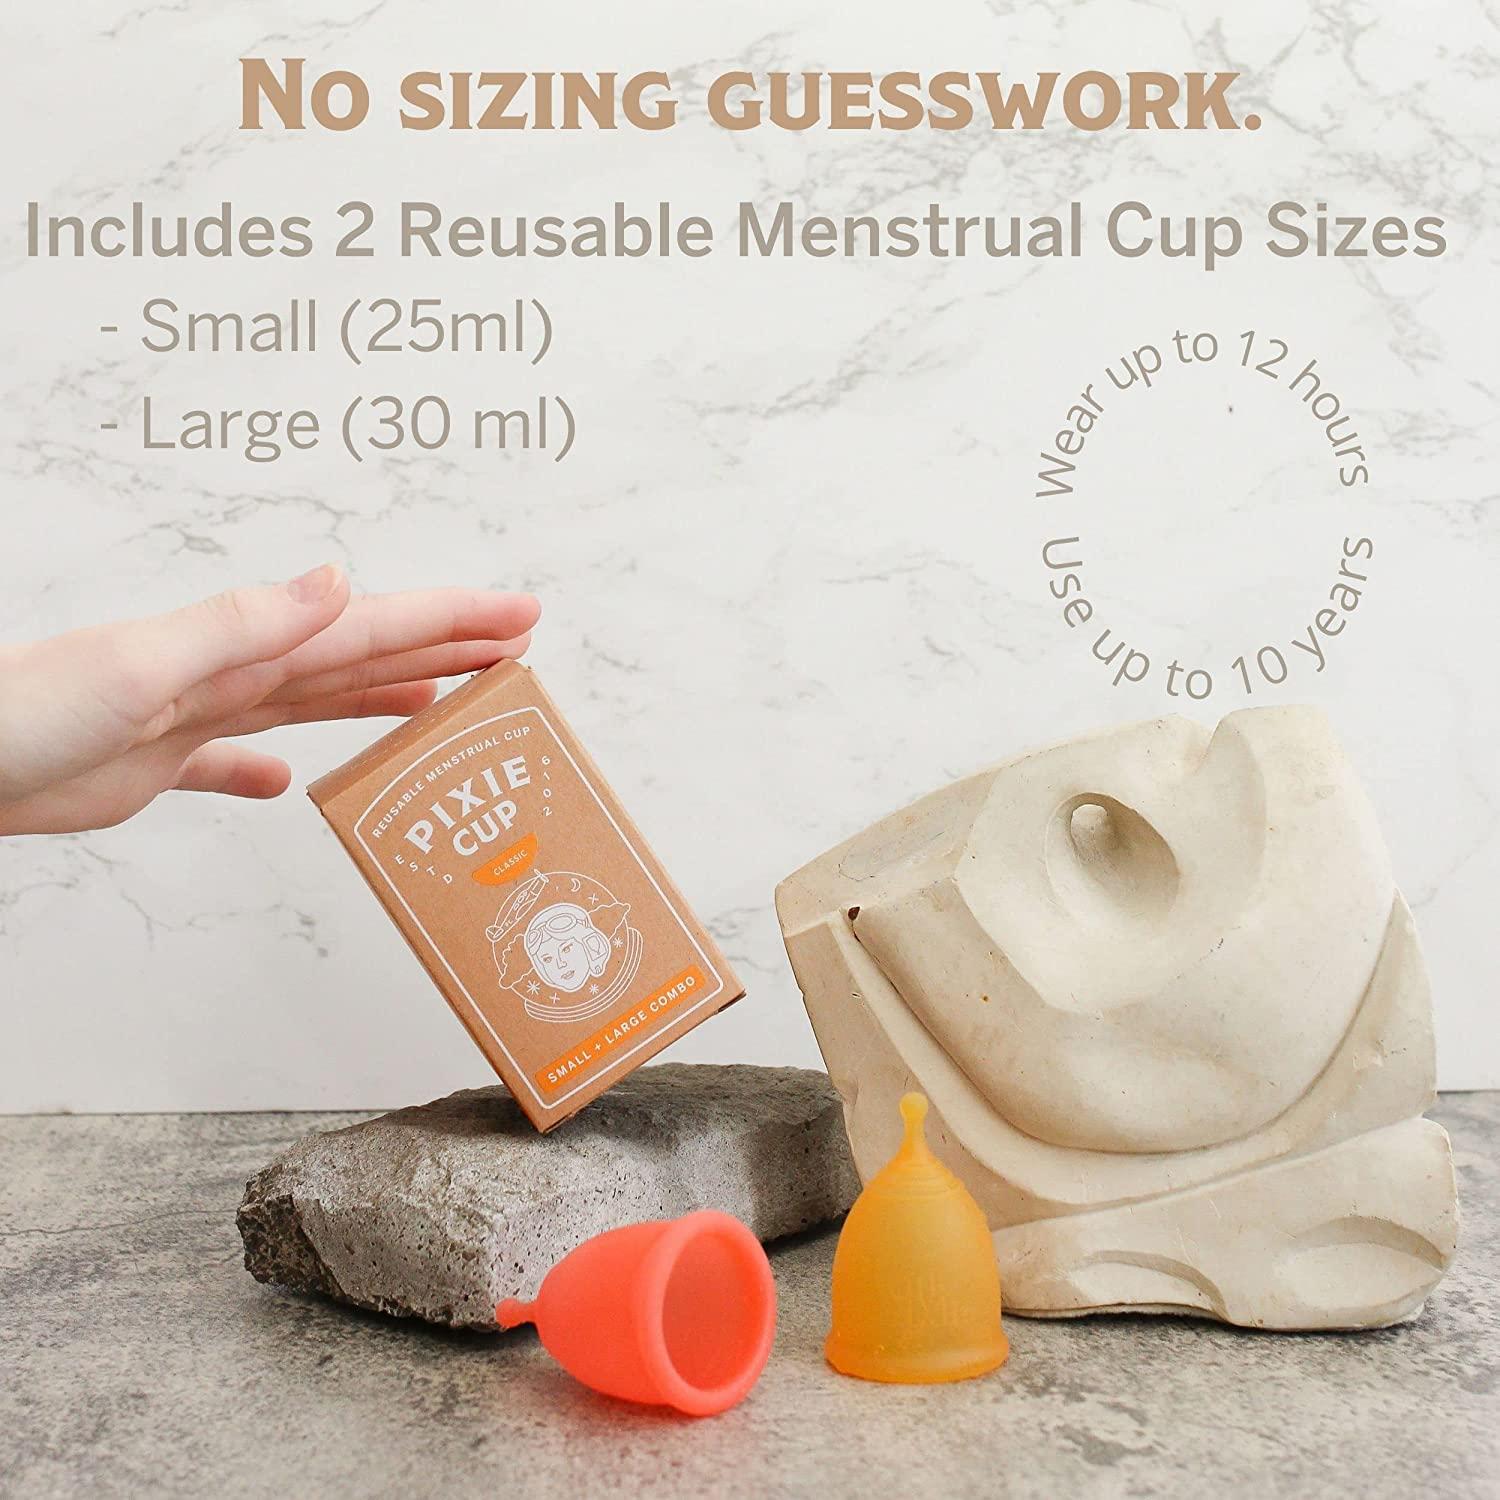 Menstrual cup removal tips - Pixie Cup